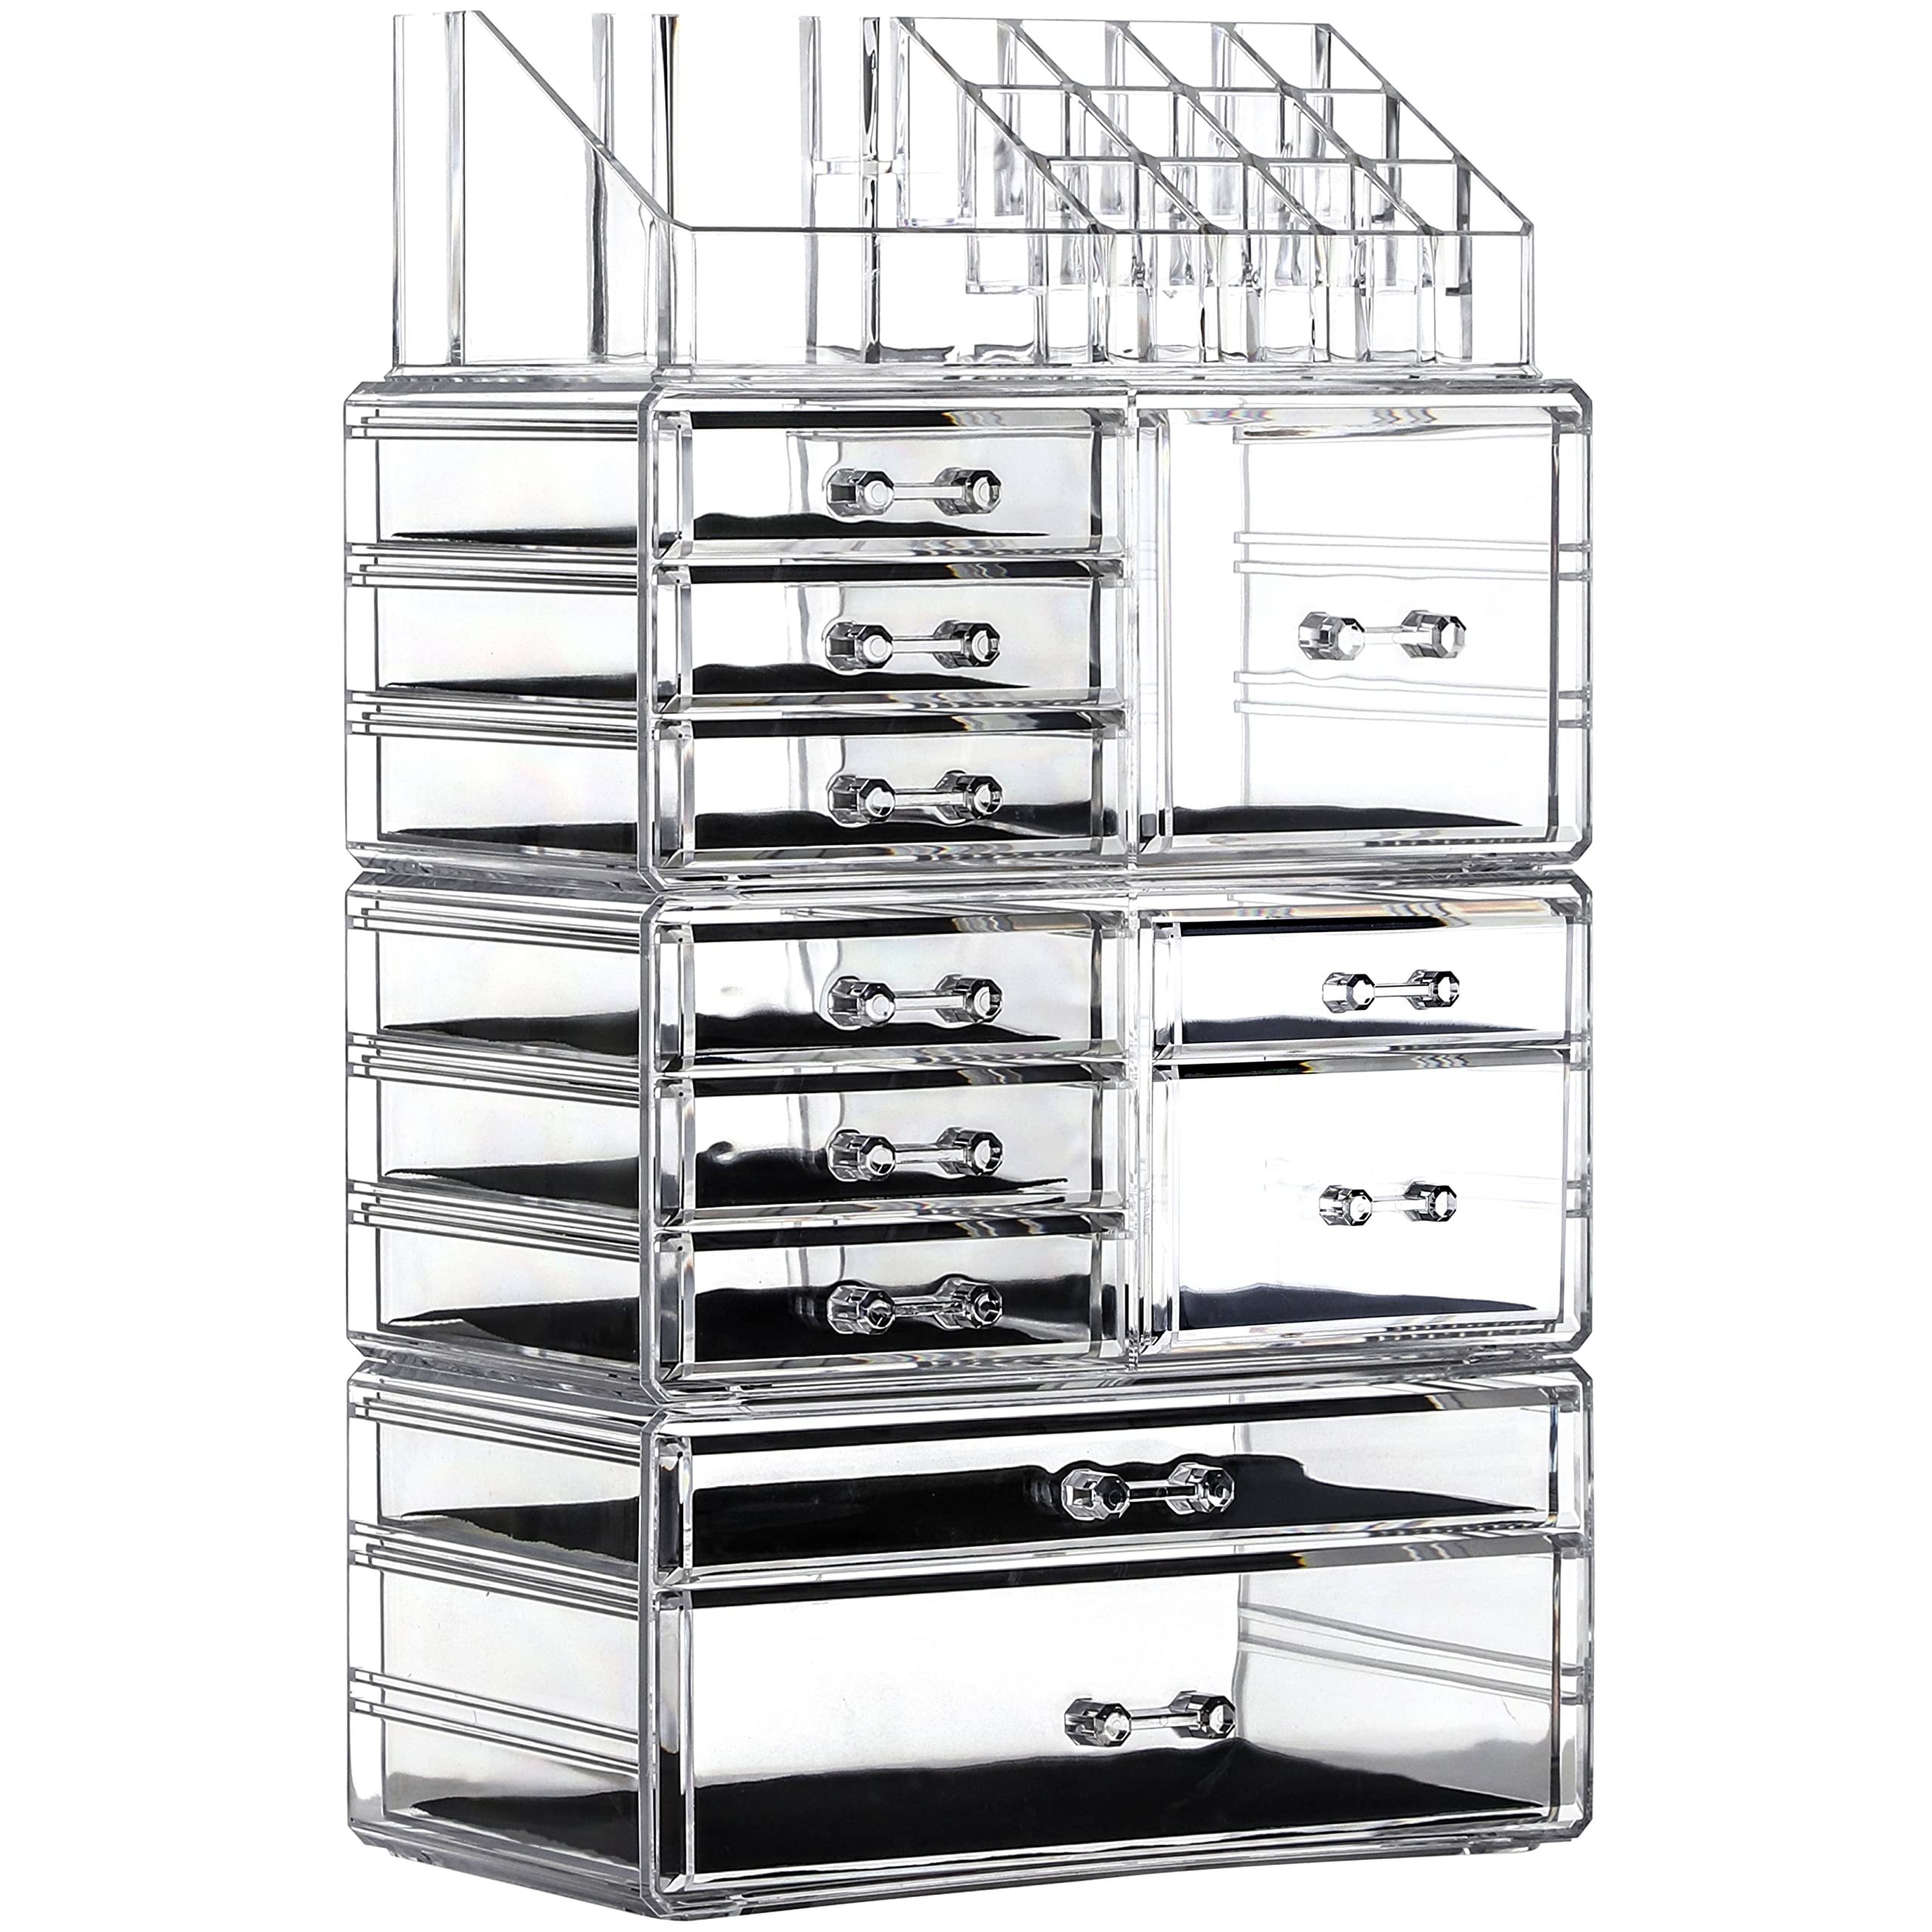 Cq acrylic Makeup Organizer Skin Care Large Clear Cosmetic Display Cases Stackable Storage Box With 11 Drawers For Vanity,Set of 4